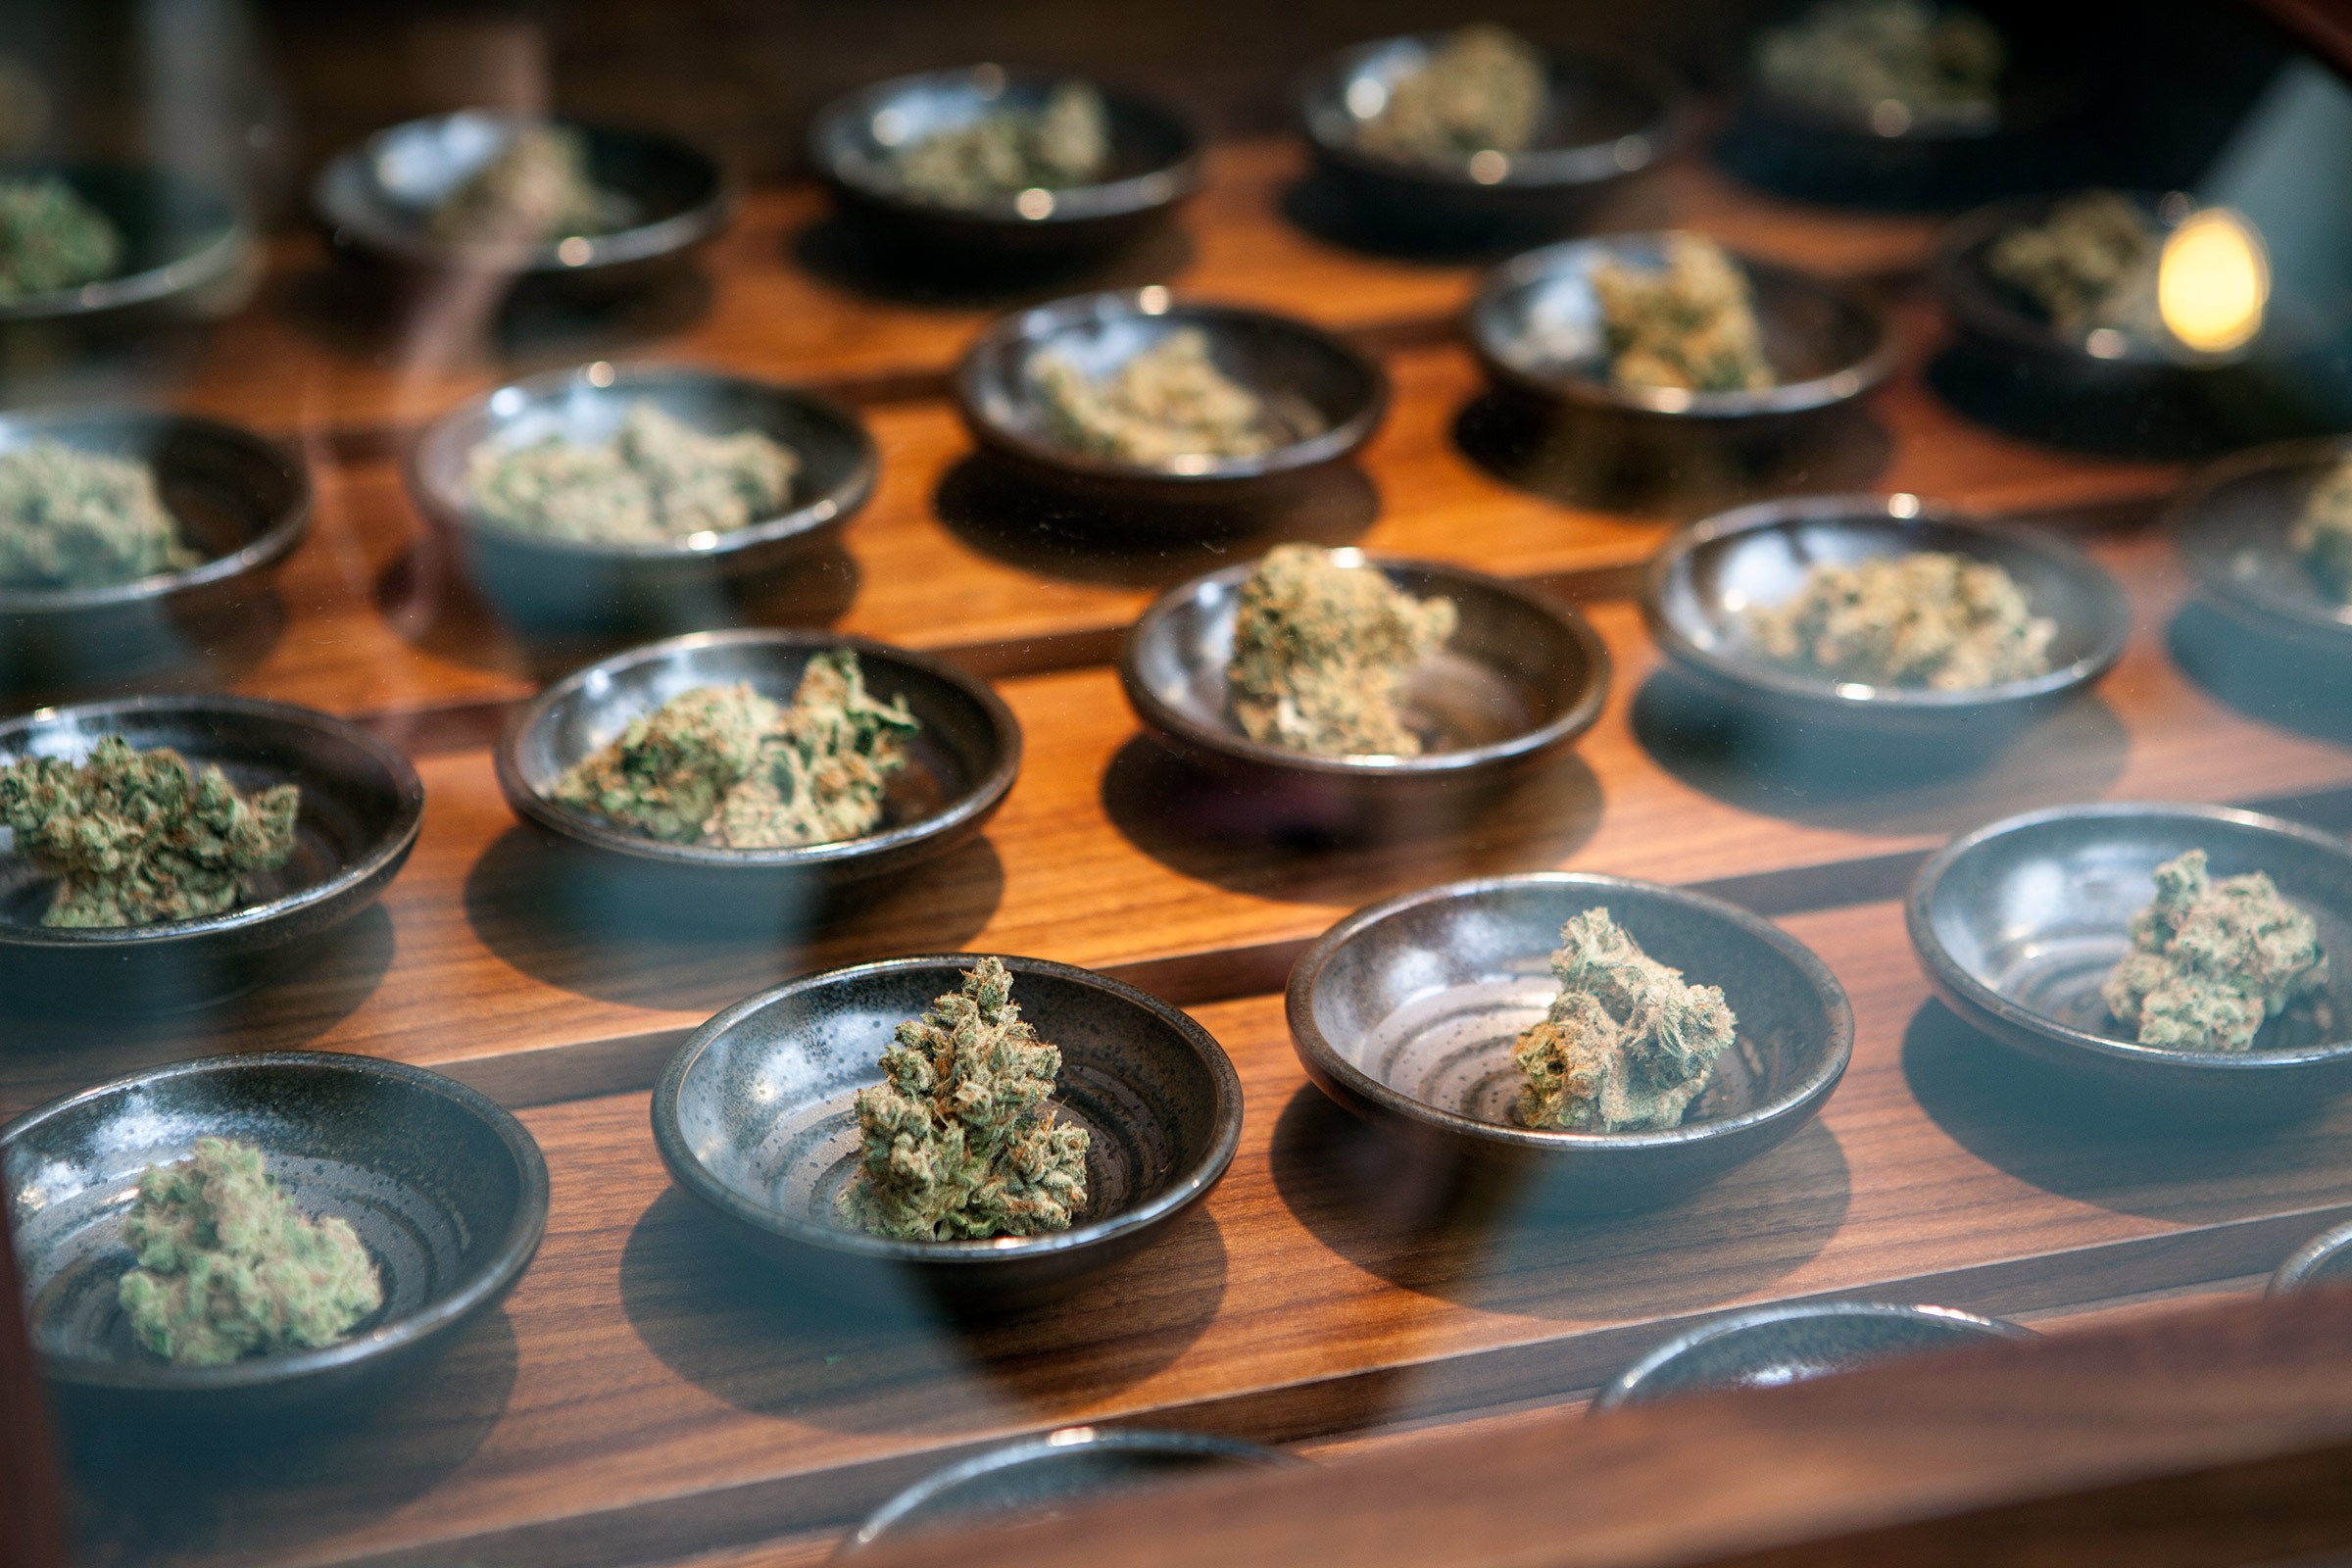 Product on display at a small business, a local marijuana dispensary, in Portland, Oregon.